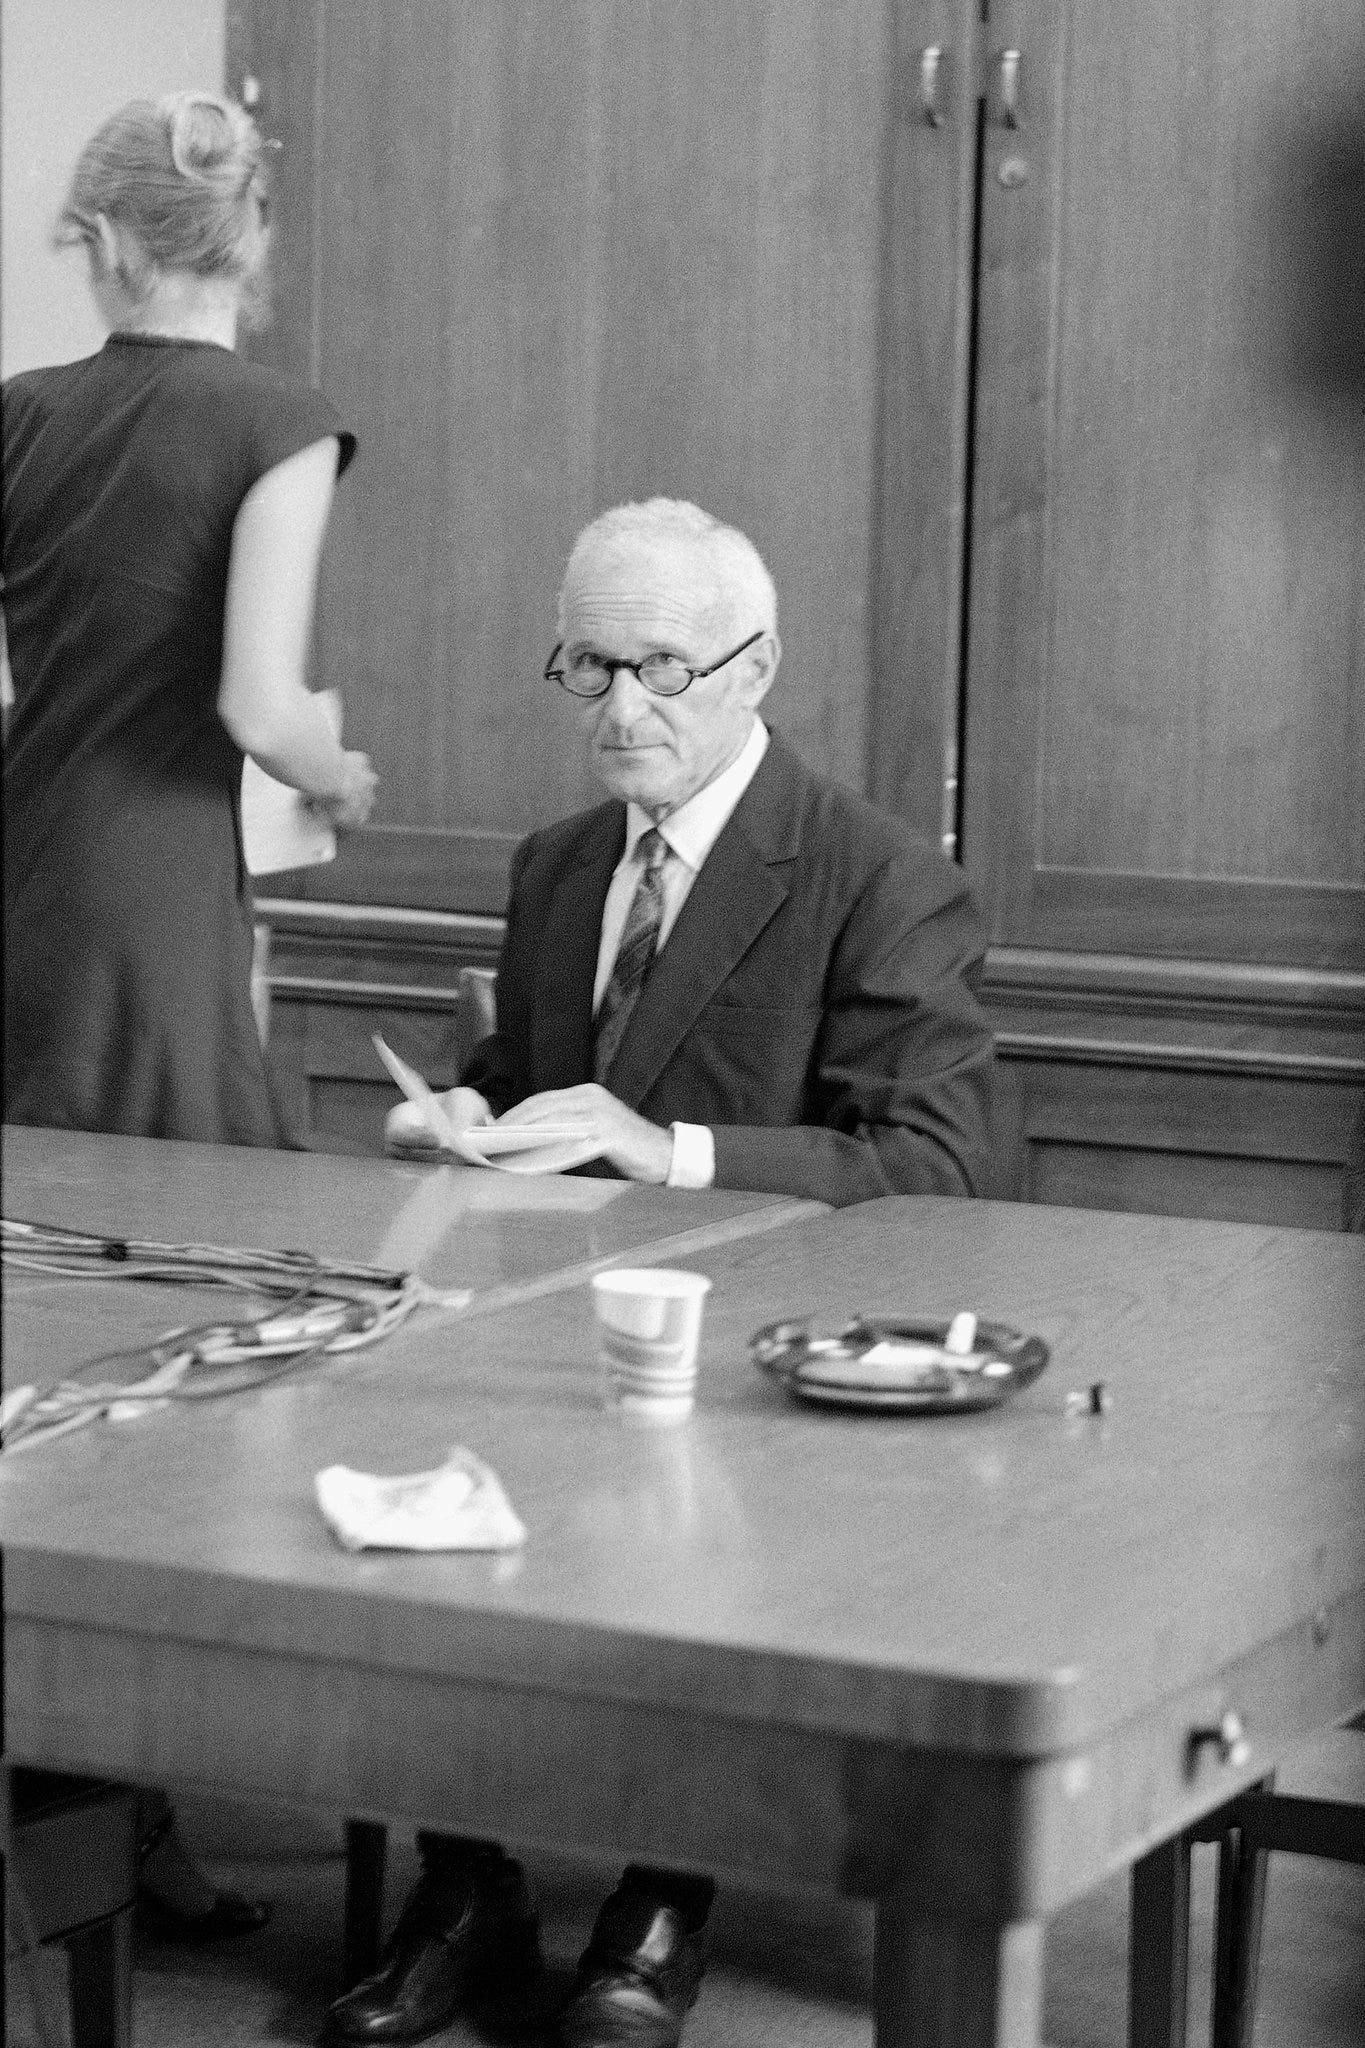 Sidney Gottlieb, 1977; Credit: Rzfrie, CC BY-SA 4.0 <https://creativecommons.org/licenses/by-sa/4.0>, via Wikimedia Commons